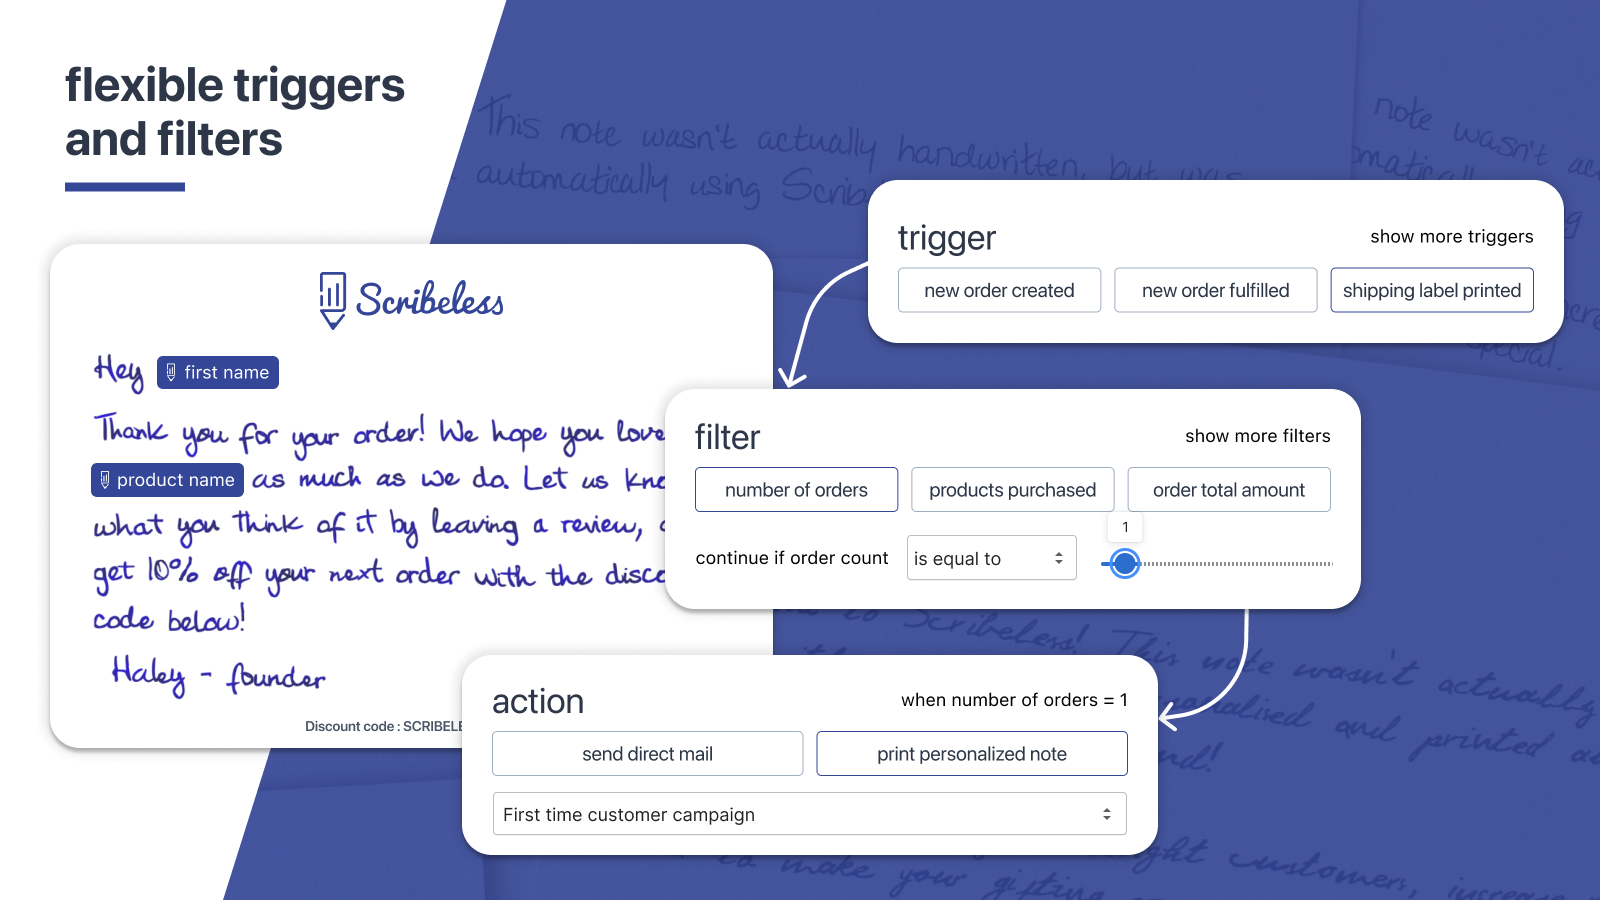 automatic triggers and filters to personalize messages